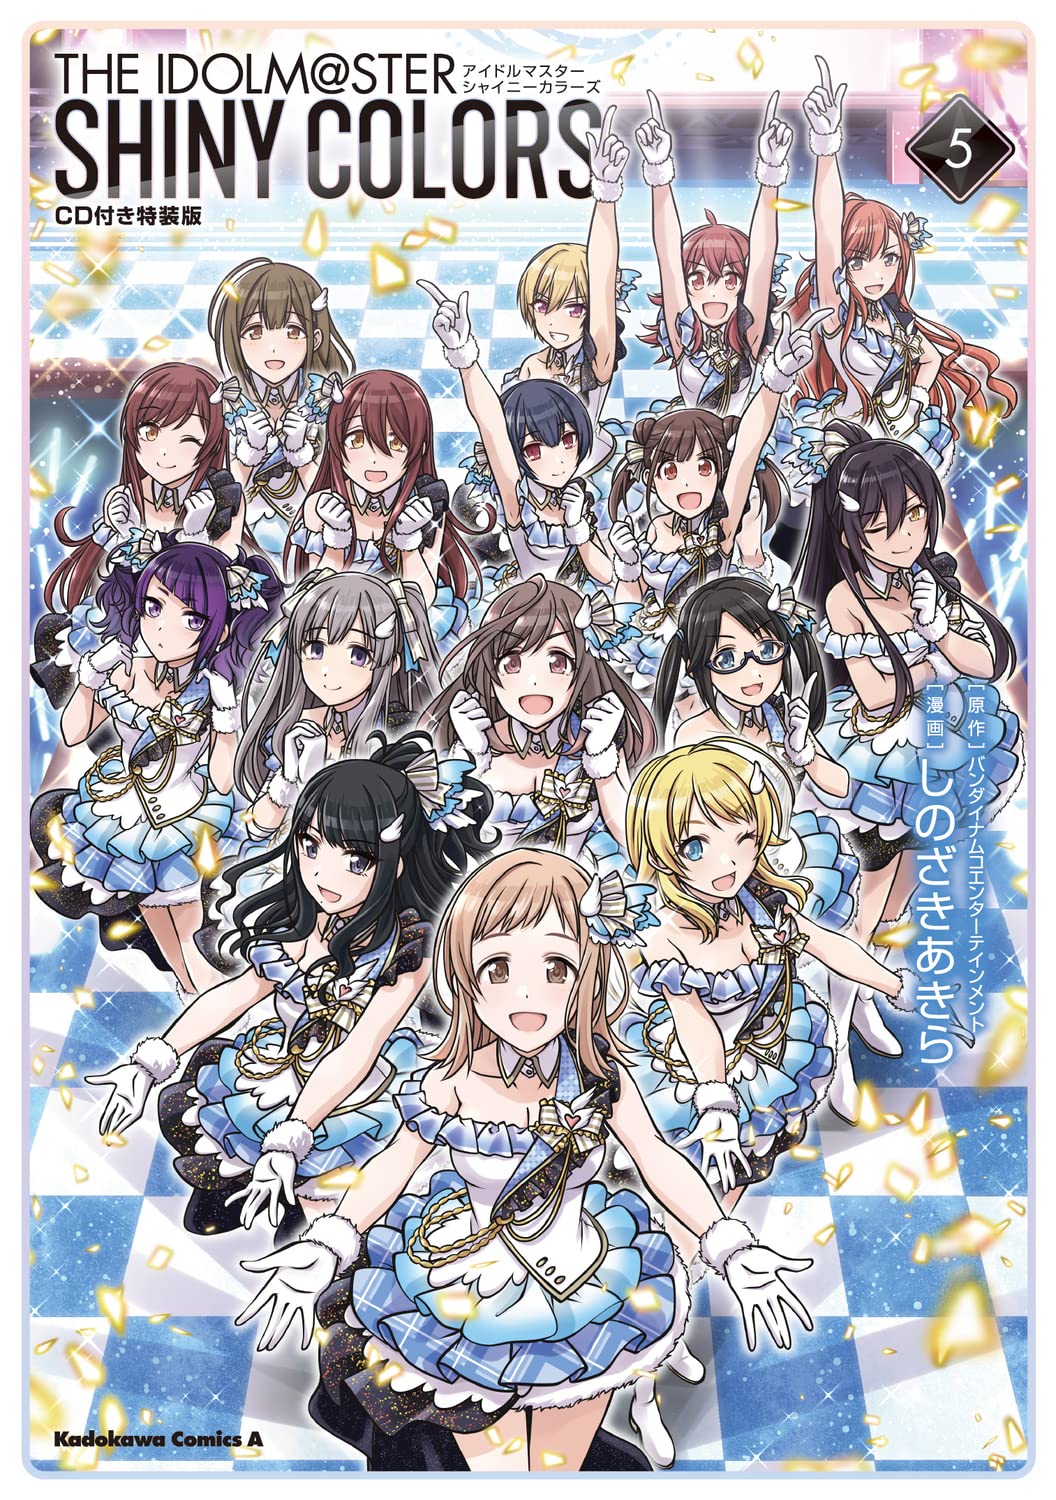 THE IDOLM@STER SHINY COLORS 2ndLIVE STEP INTO THE SUNSET SKY Blu 